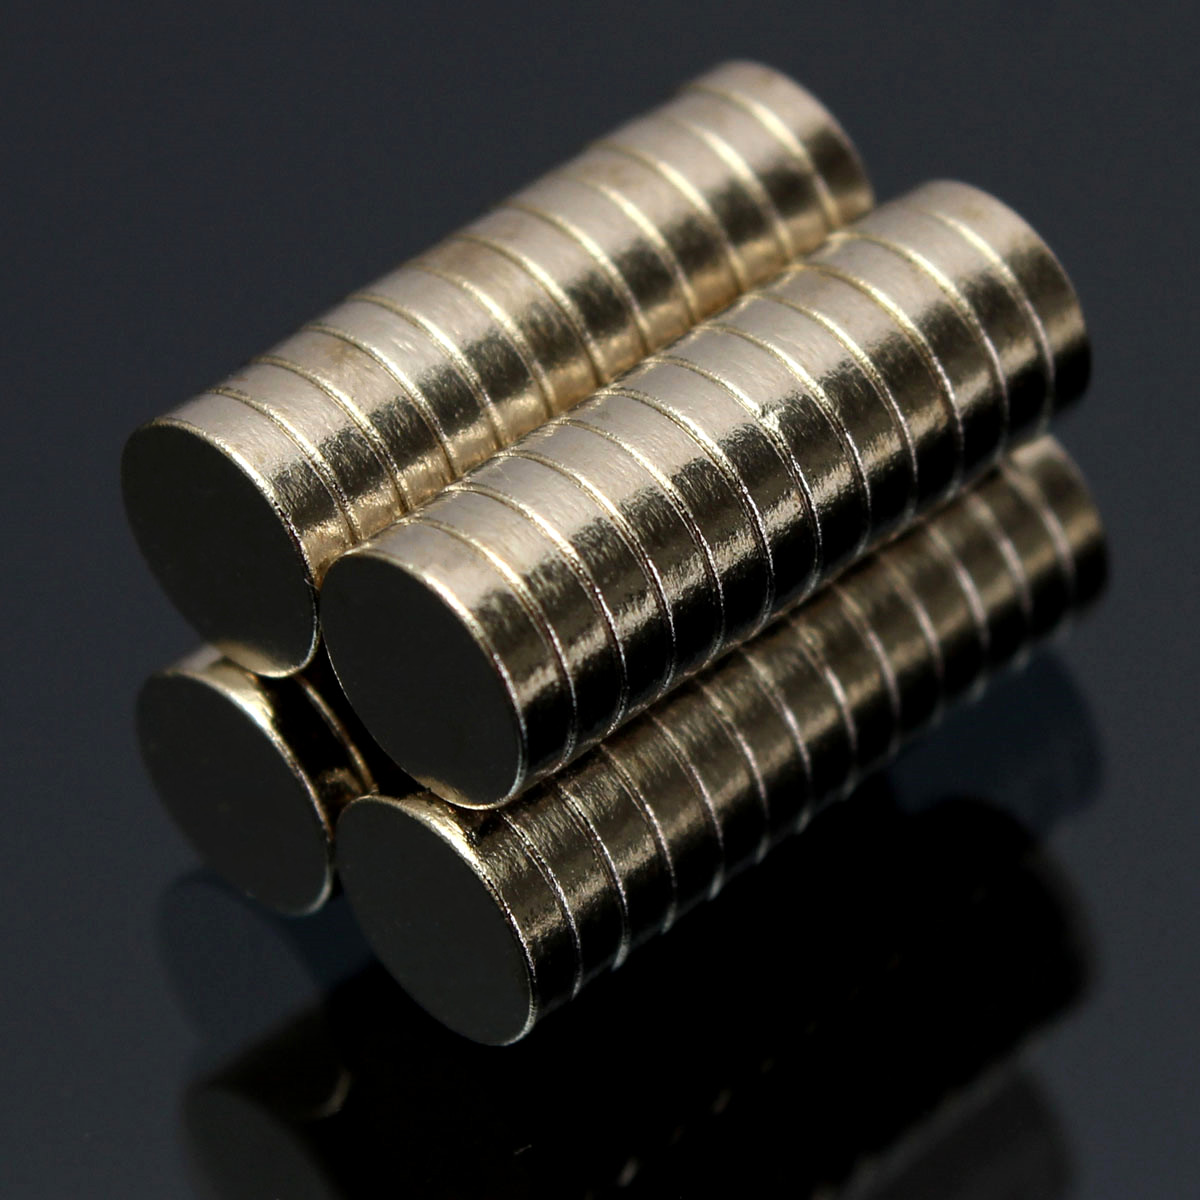 50Pcs Strong Disc Cylinder Round Rare Earth Neodymium Magnets 10mm x 3mm N35 